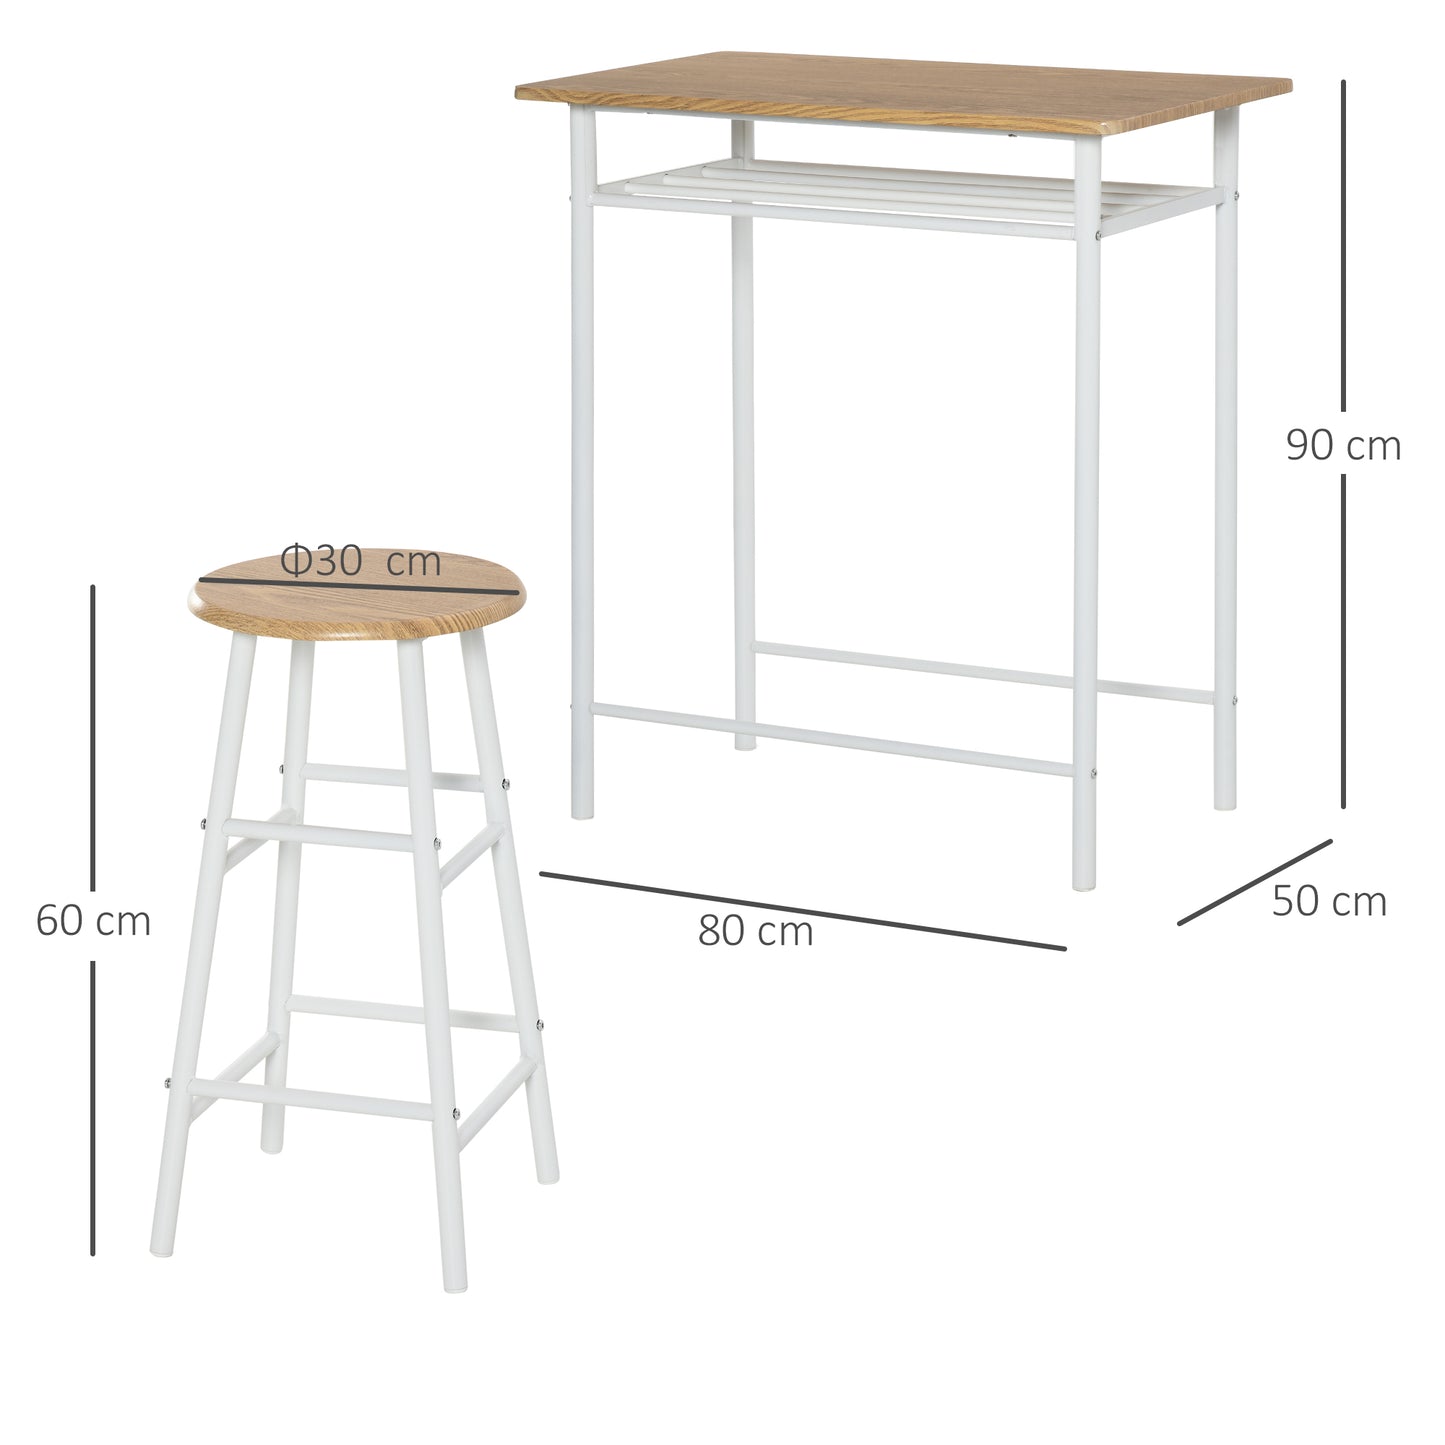 HOMCOM 3 Pieces Bar Height Dining Furniture Set with 1 Table and 2 Matching Chairs with Metal Frame Footrest and Storage Shlef, for Kitchen, Dining Room, Pub, Cafe, White and Oak 3-Piece Kitchen Home Pub Cafe